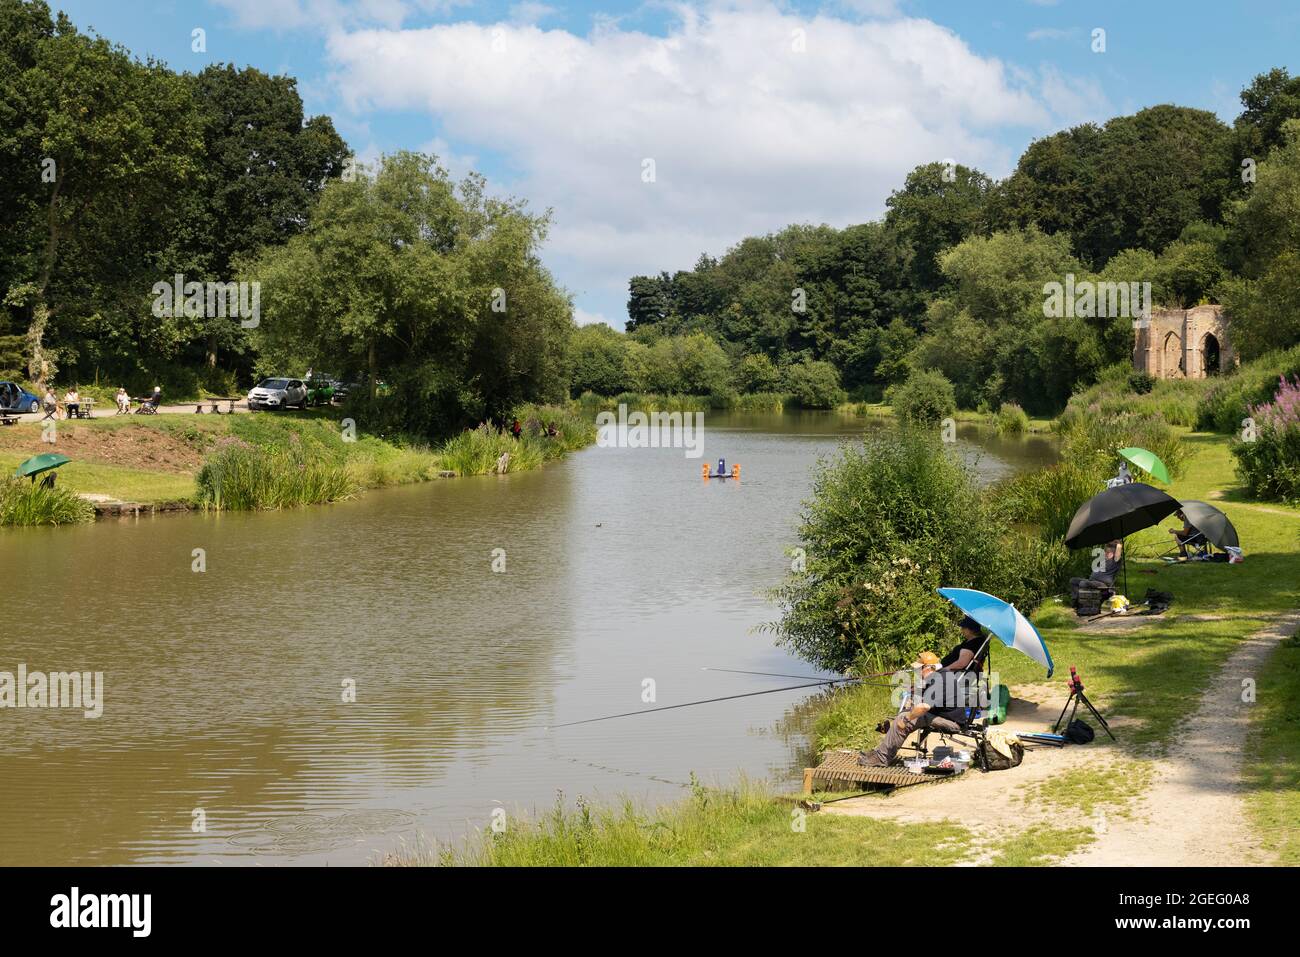 Angling UK; people fishing in Folly Lake, Risby Folly in the background, Risby, near Beverley, East Yorkshire UK on a sunny day in summer, July Stock Photo